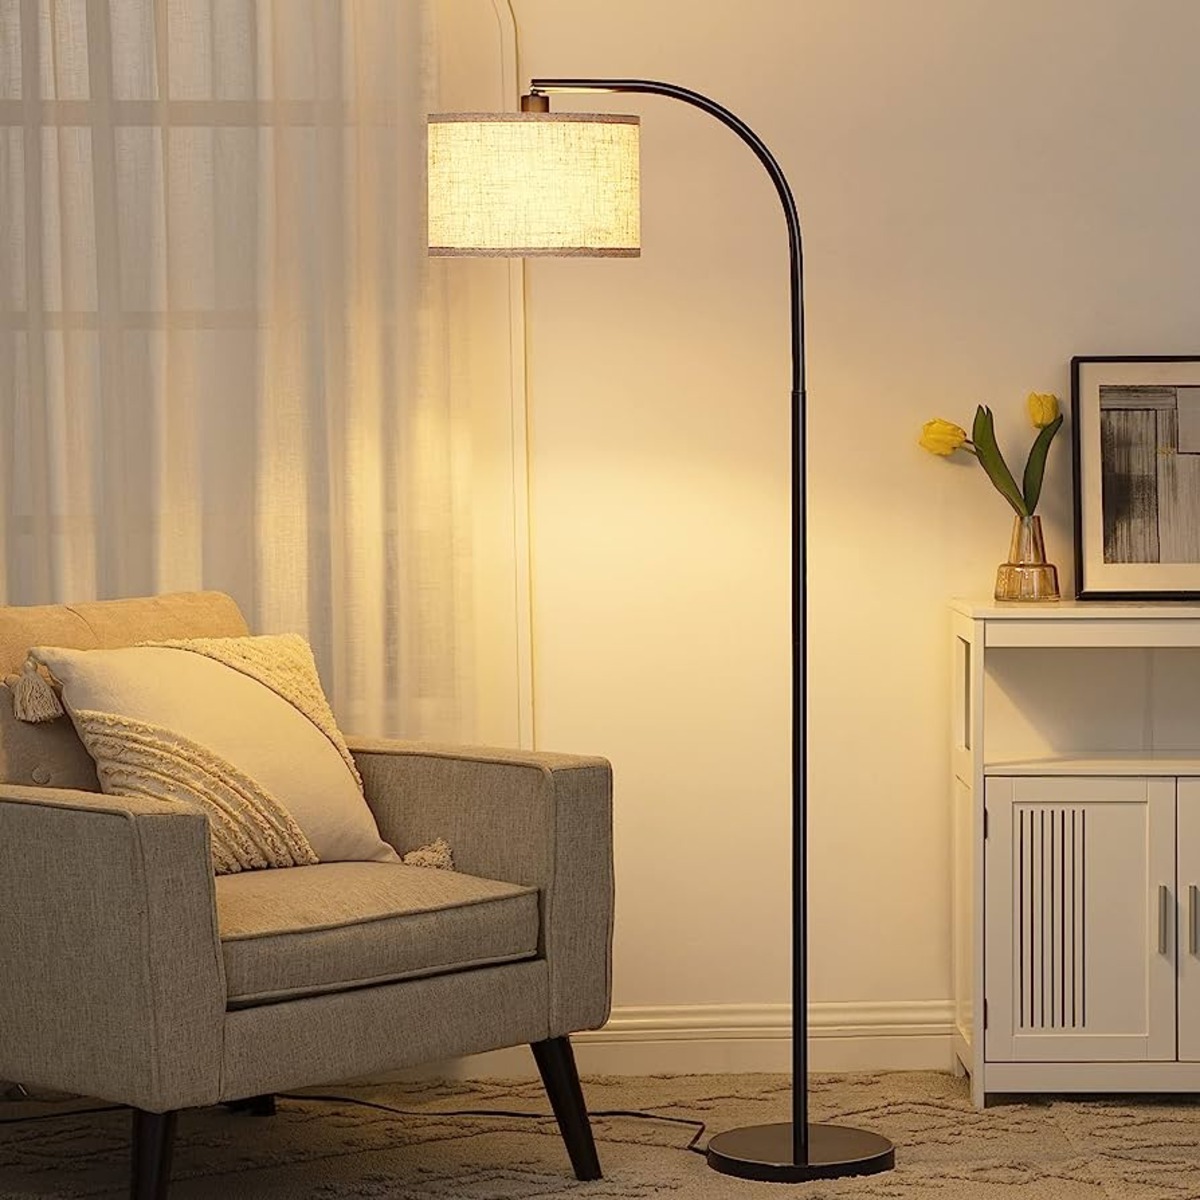 Where To Buy A Floor Lamp